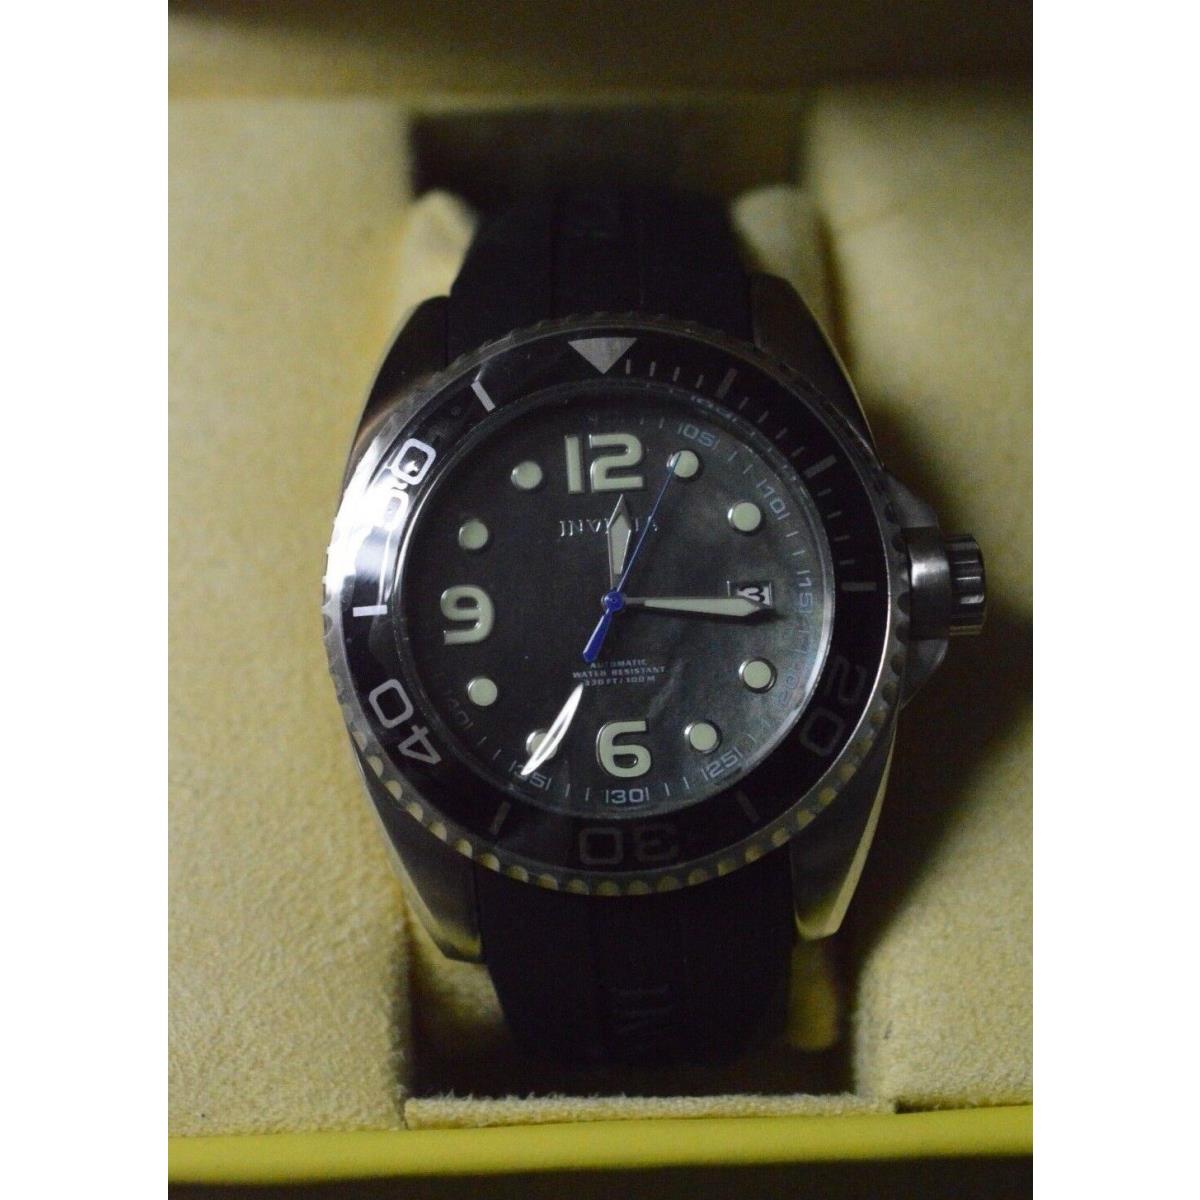 Invicta watch Pro Diver - Dial: , Band: Black, Manufacturer Face: